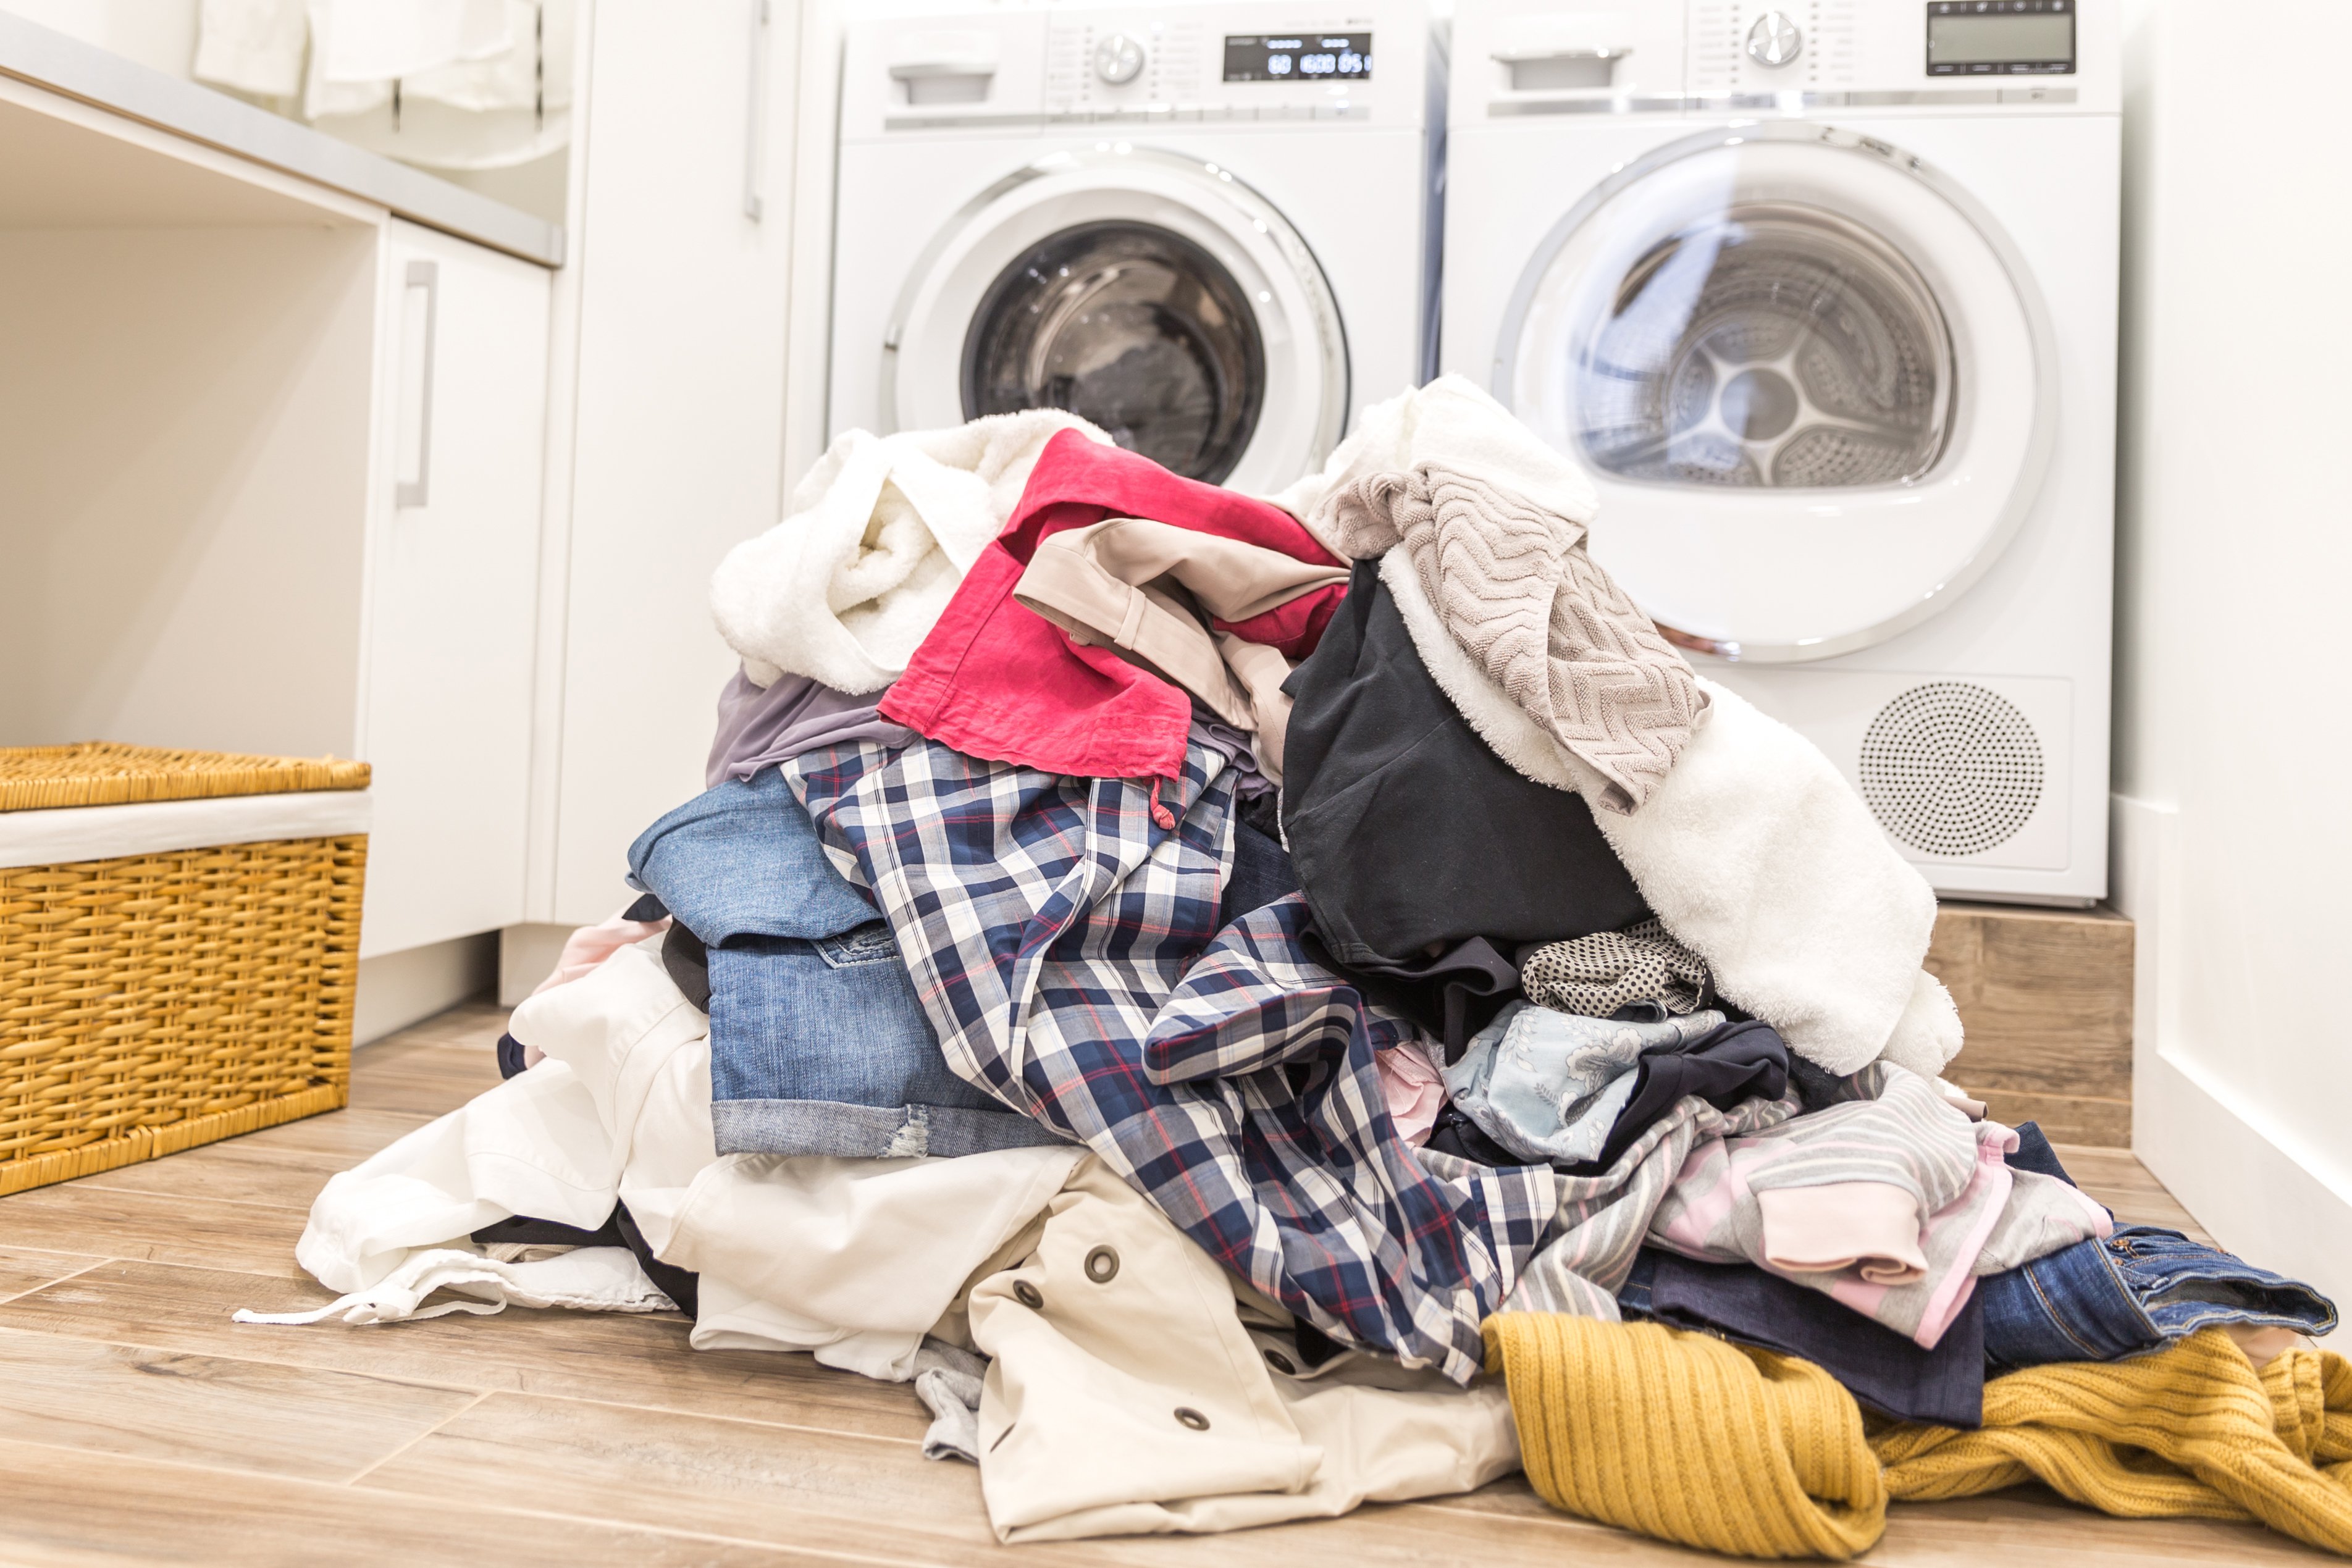 Dirty laundry on the floor. | Photo: Shutterstock